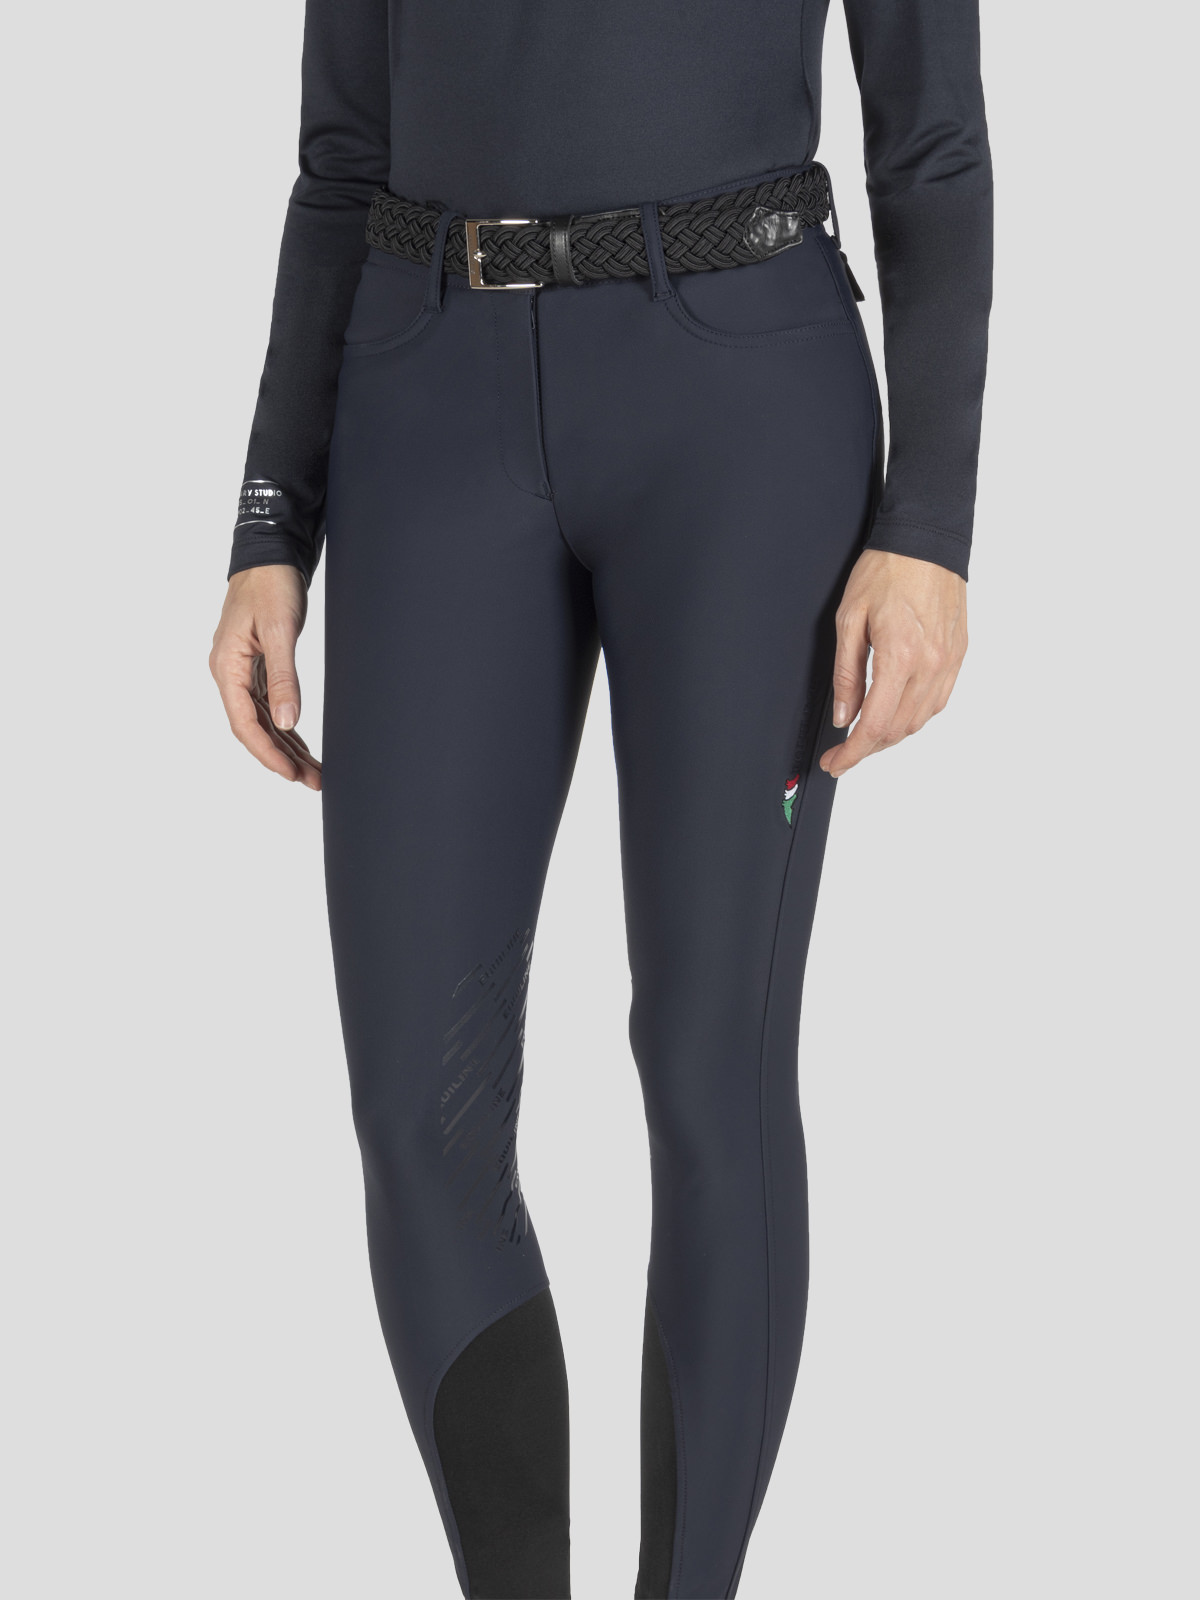 Women's Riding Breeches - Riding Pants for Ladies - Equiline